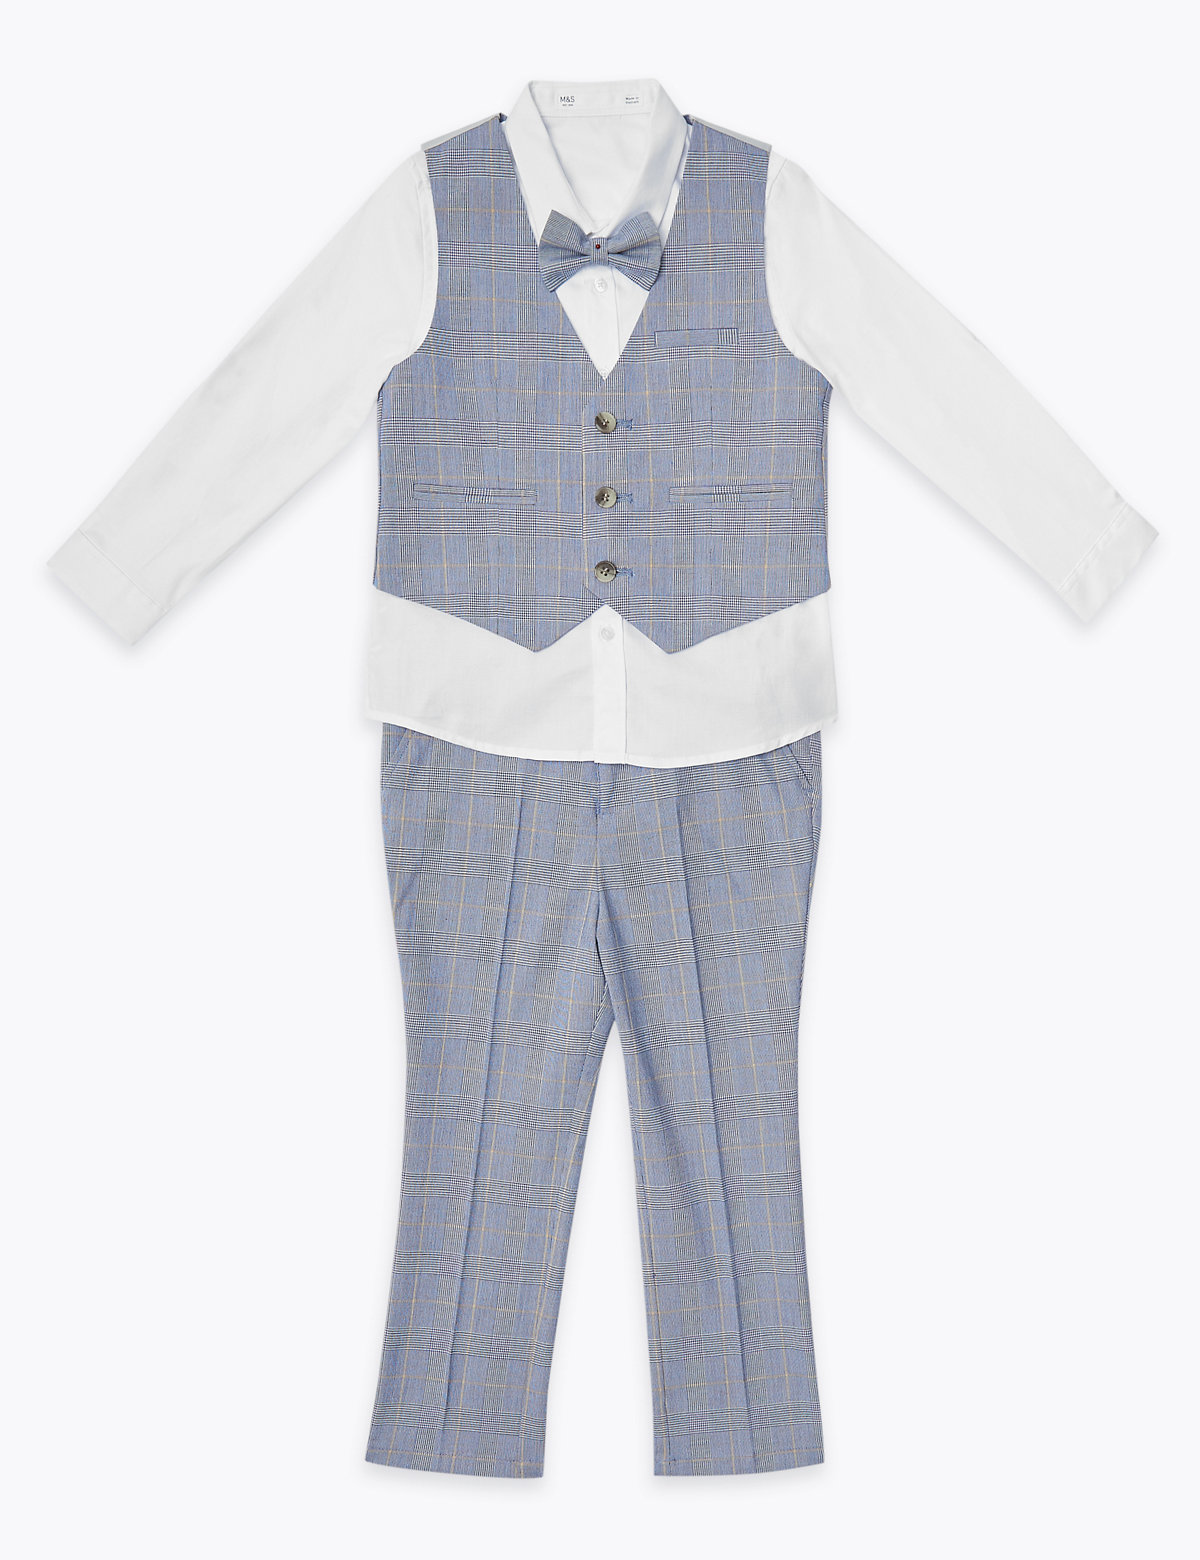 4 Piece Checked Suit Outfit